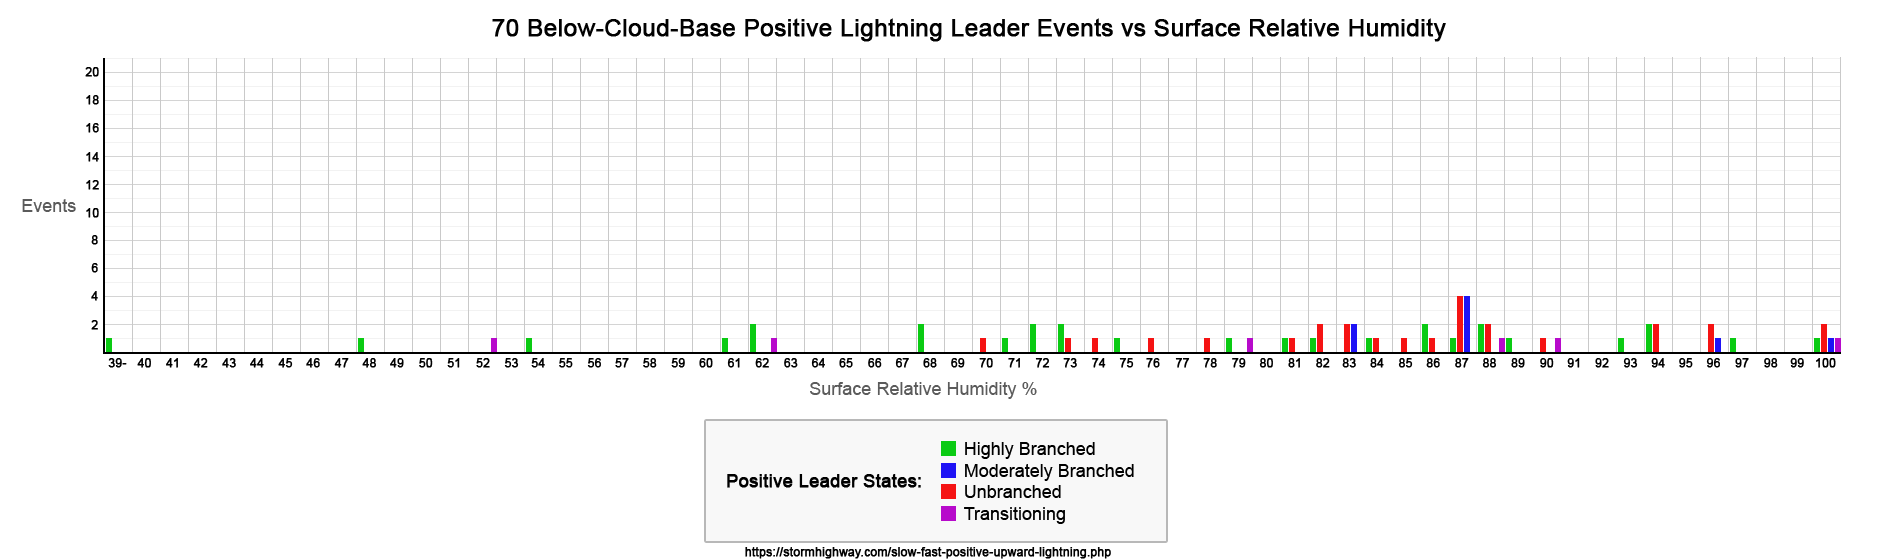 Below-Cloud-Base Positive Lightning Leader Events vs Surface Relative Humidity